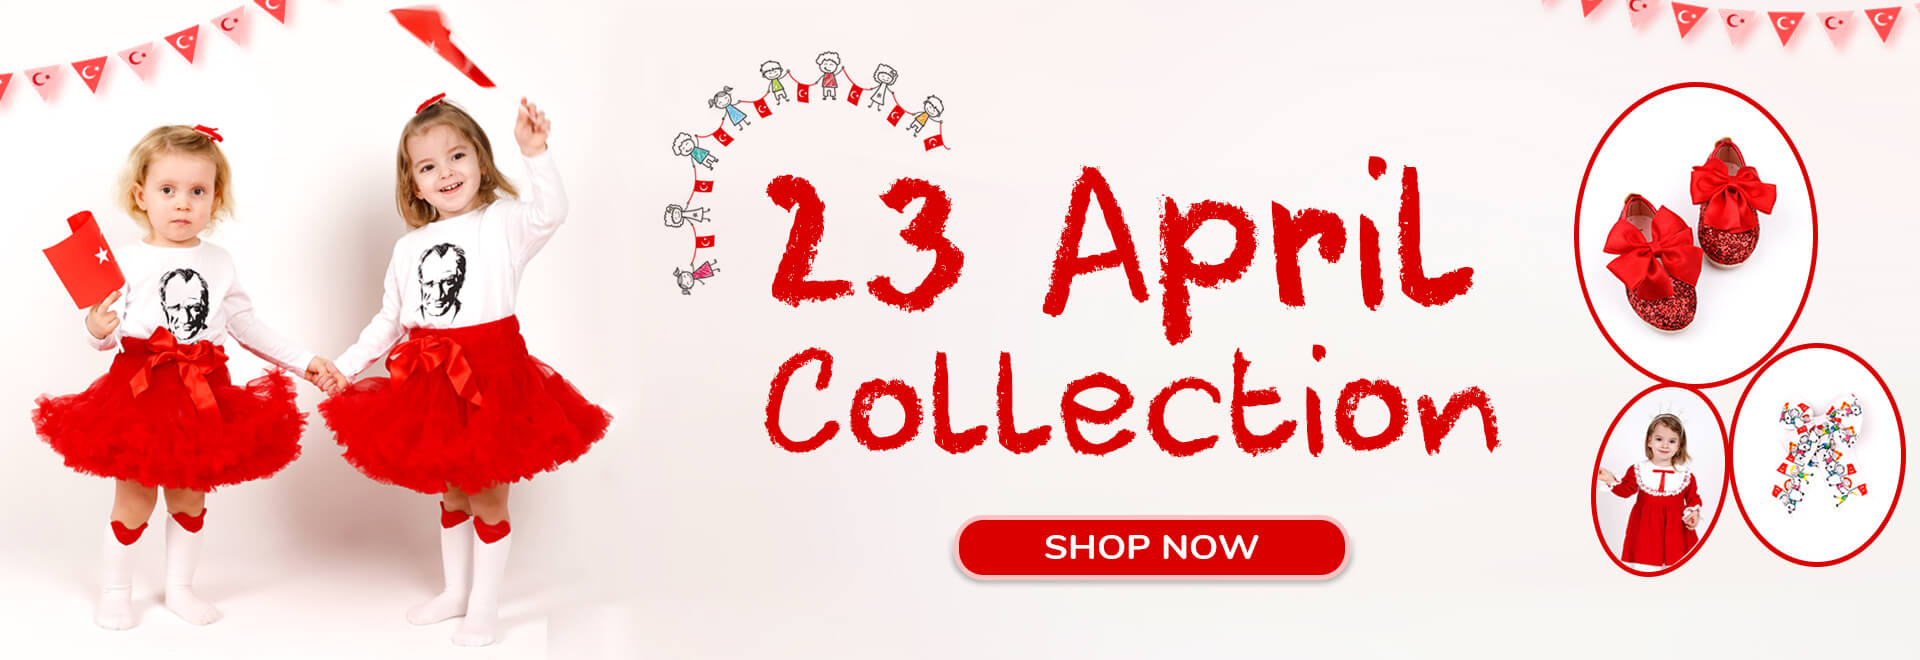 23 april collection